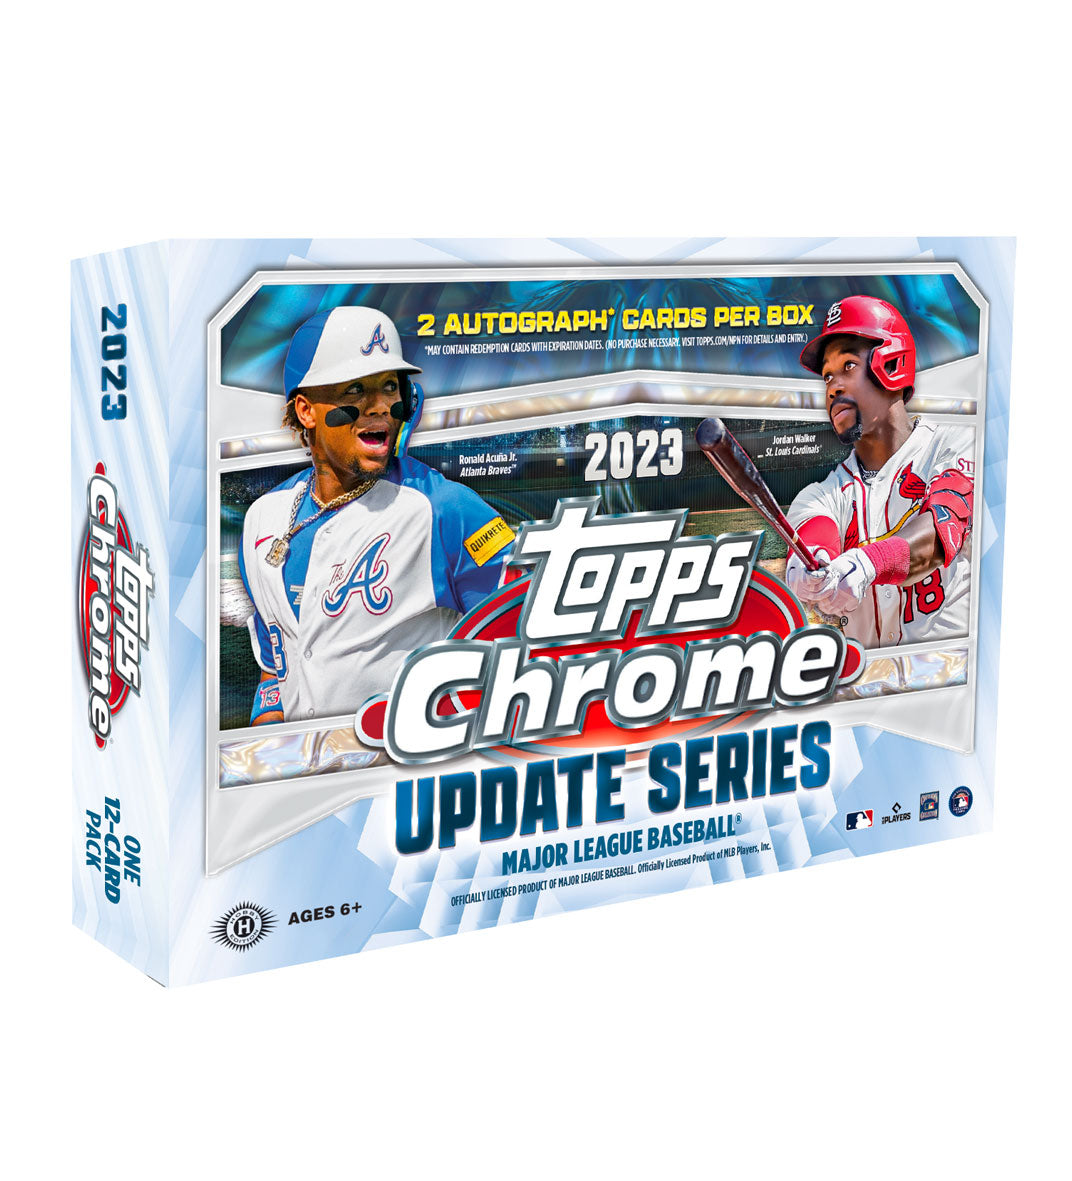 2023 Topps Chrome Update Baseball Update Breakers Delight Hobby Box Unwrap the magic of 2023 Topps Chrome Update Baseball! Each hobby box of this thrilling update contains 2 autograph cards, numbered parallels, and inserts. Experience the awe and delight of collecting with 2023 Topps Chrome Update!